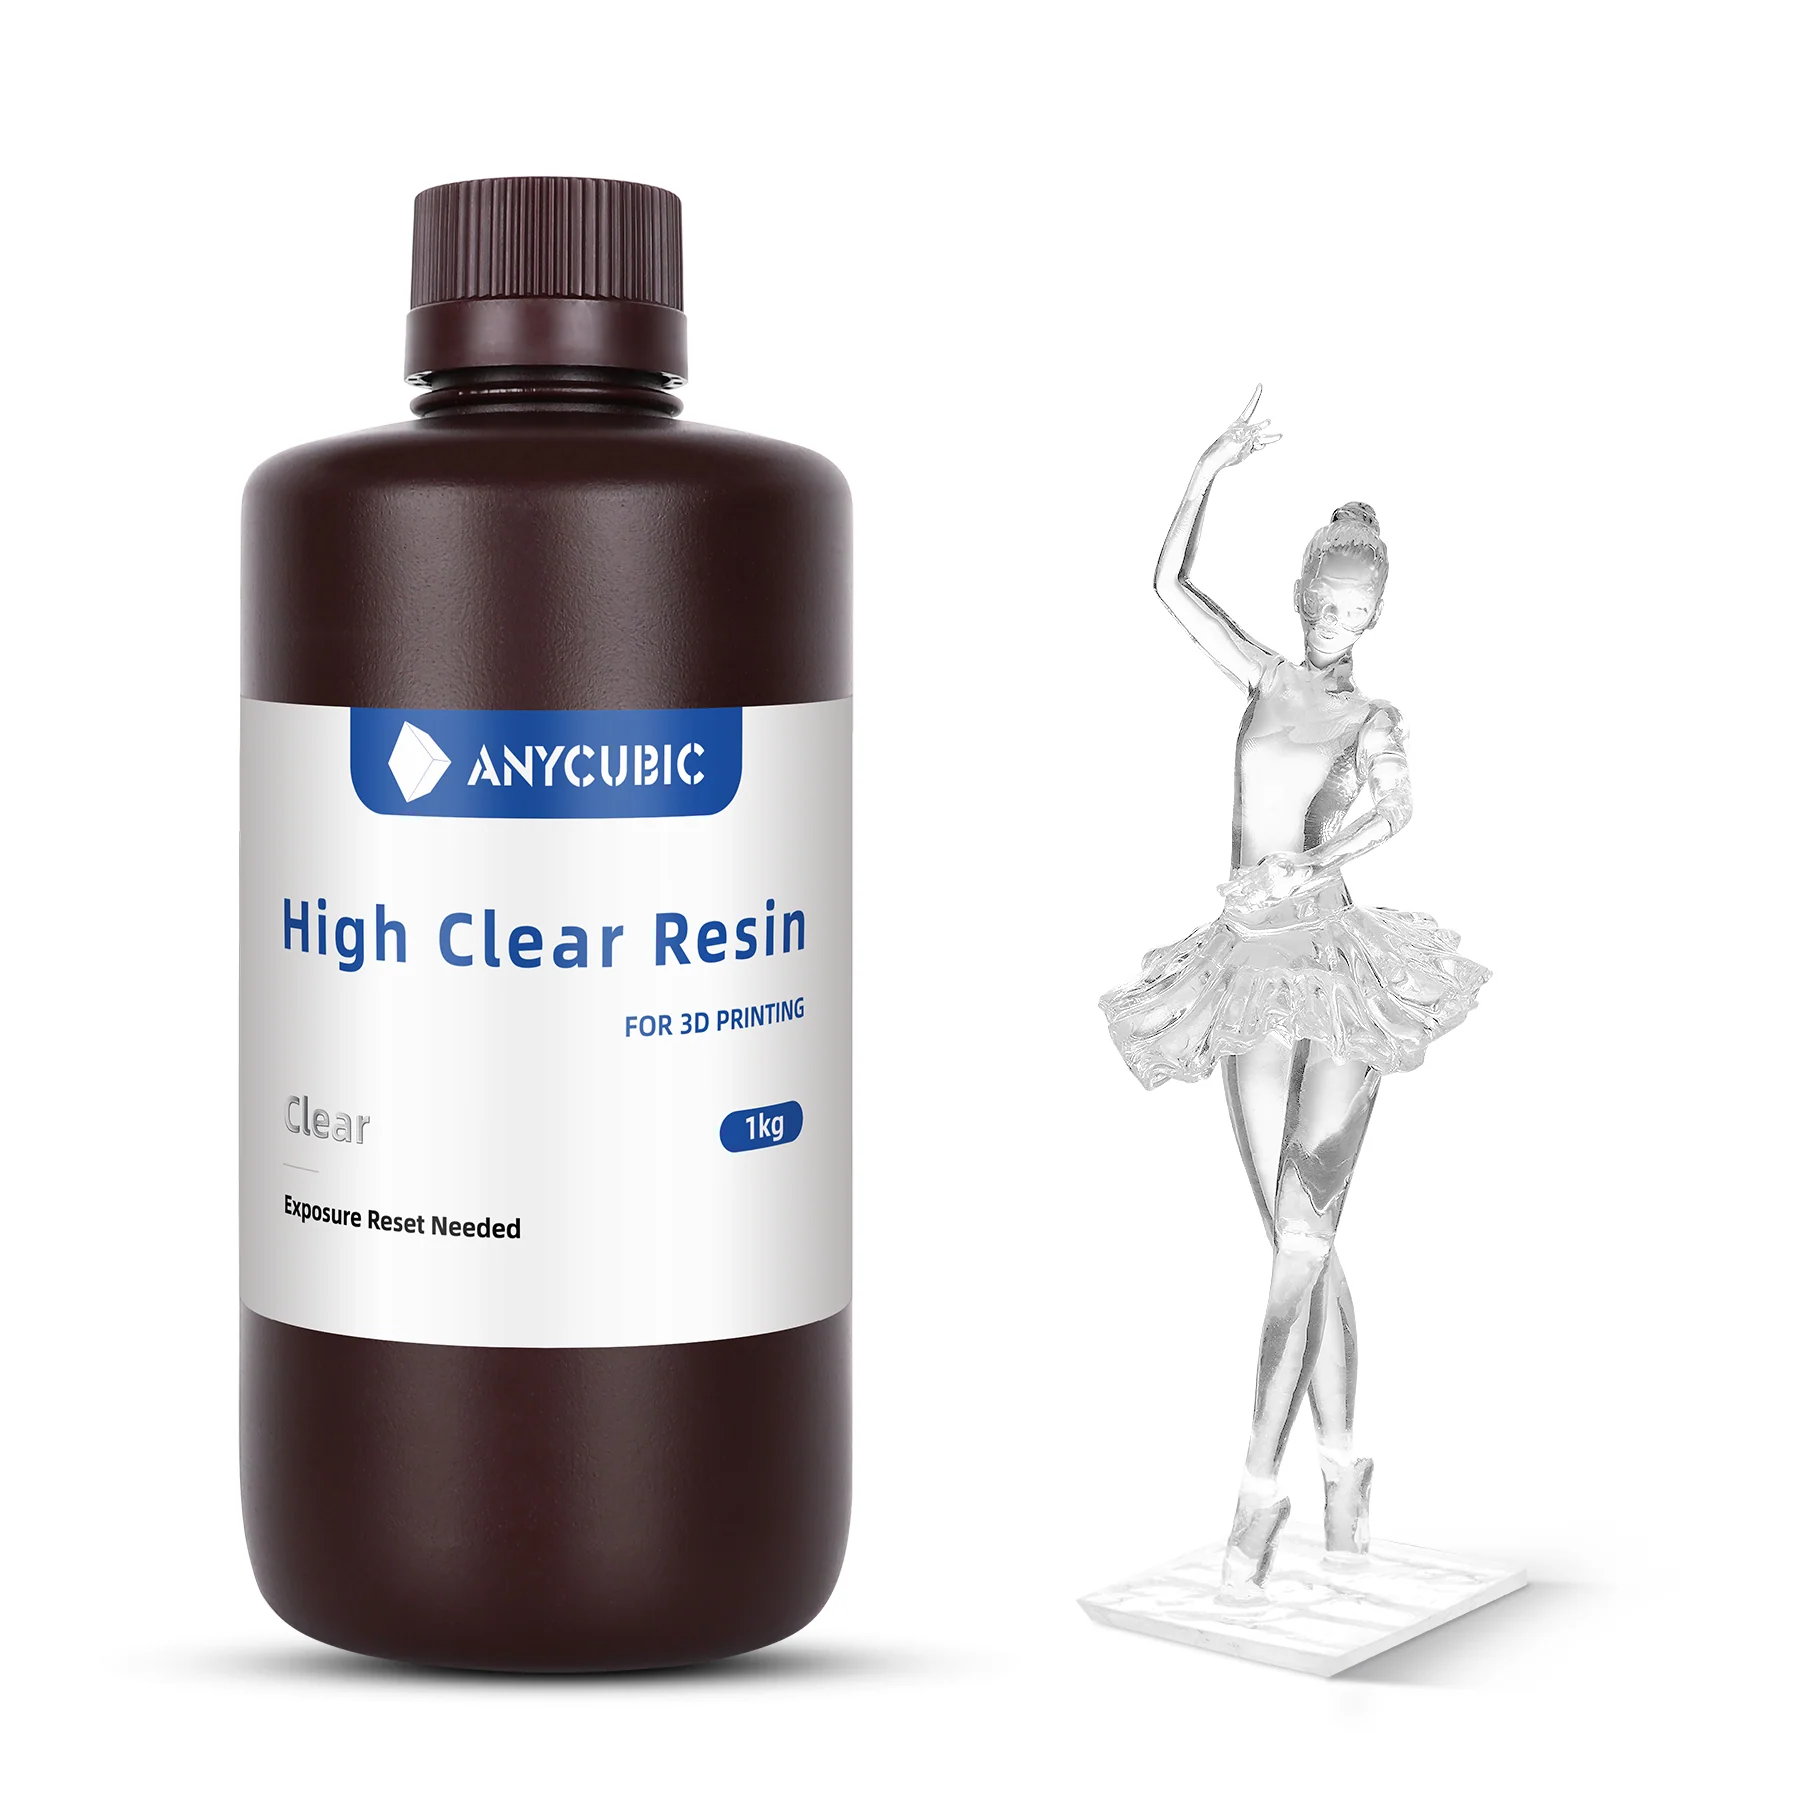 HighClearResin_Clear Anycubic